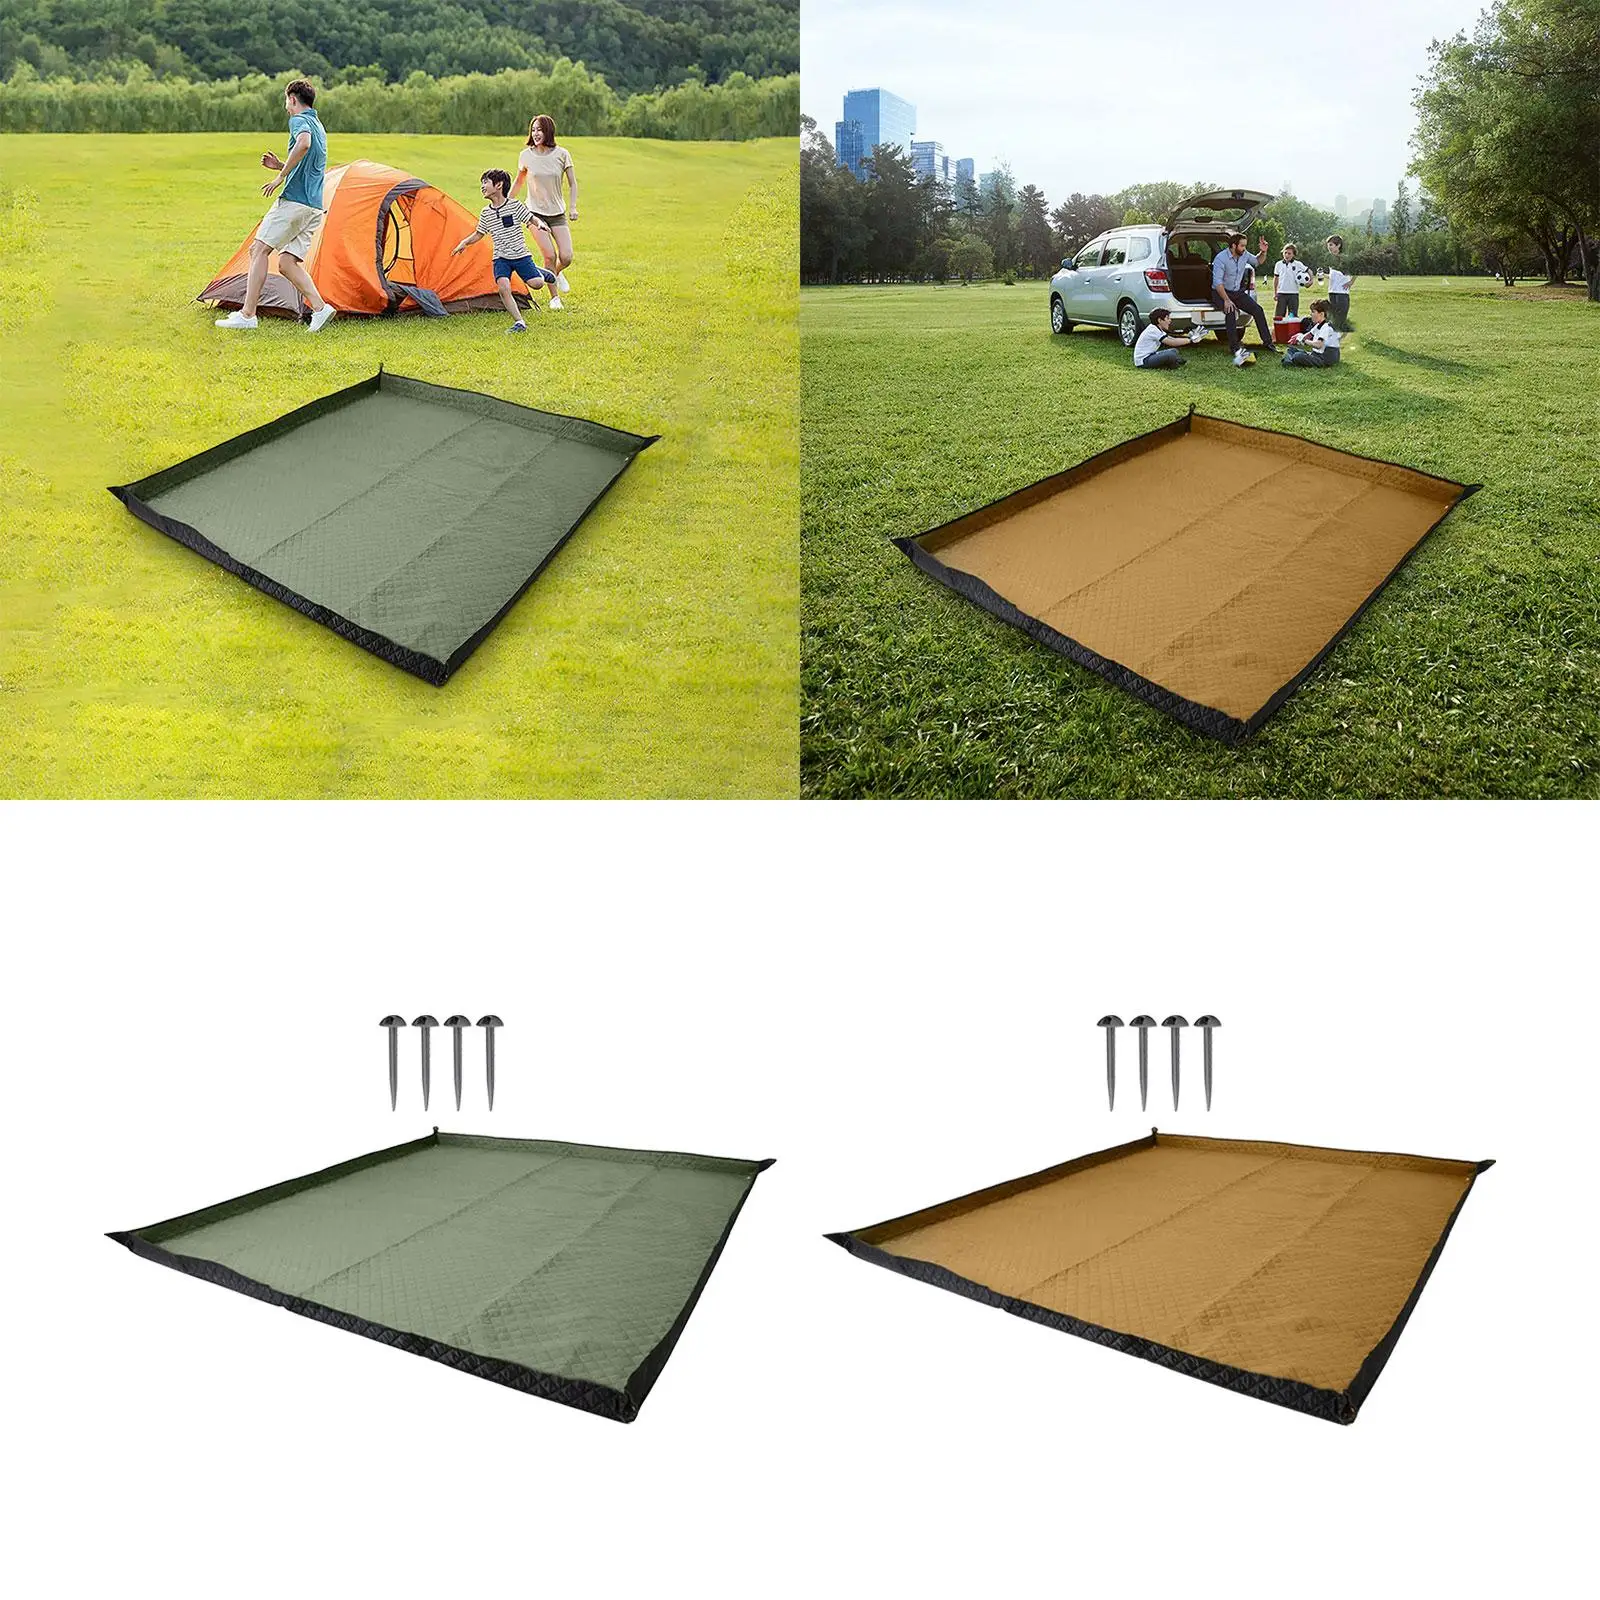 Tent Pad Sleeping Pad Foldable Moistureproof Wear Resistant Rug Camping Blanket Picnic Blanket for Camping Hiking Backpacking